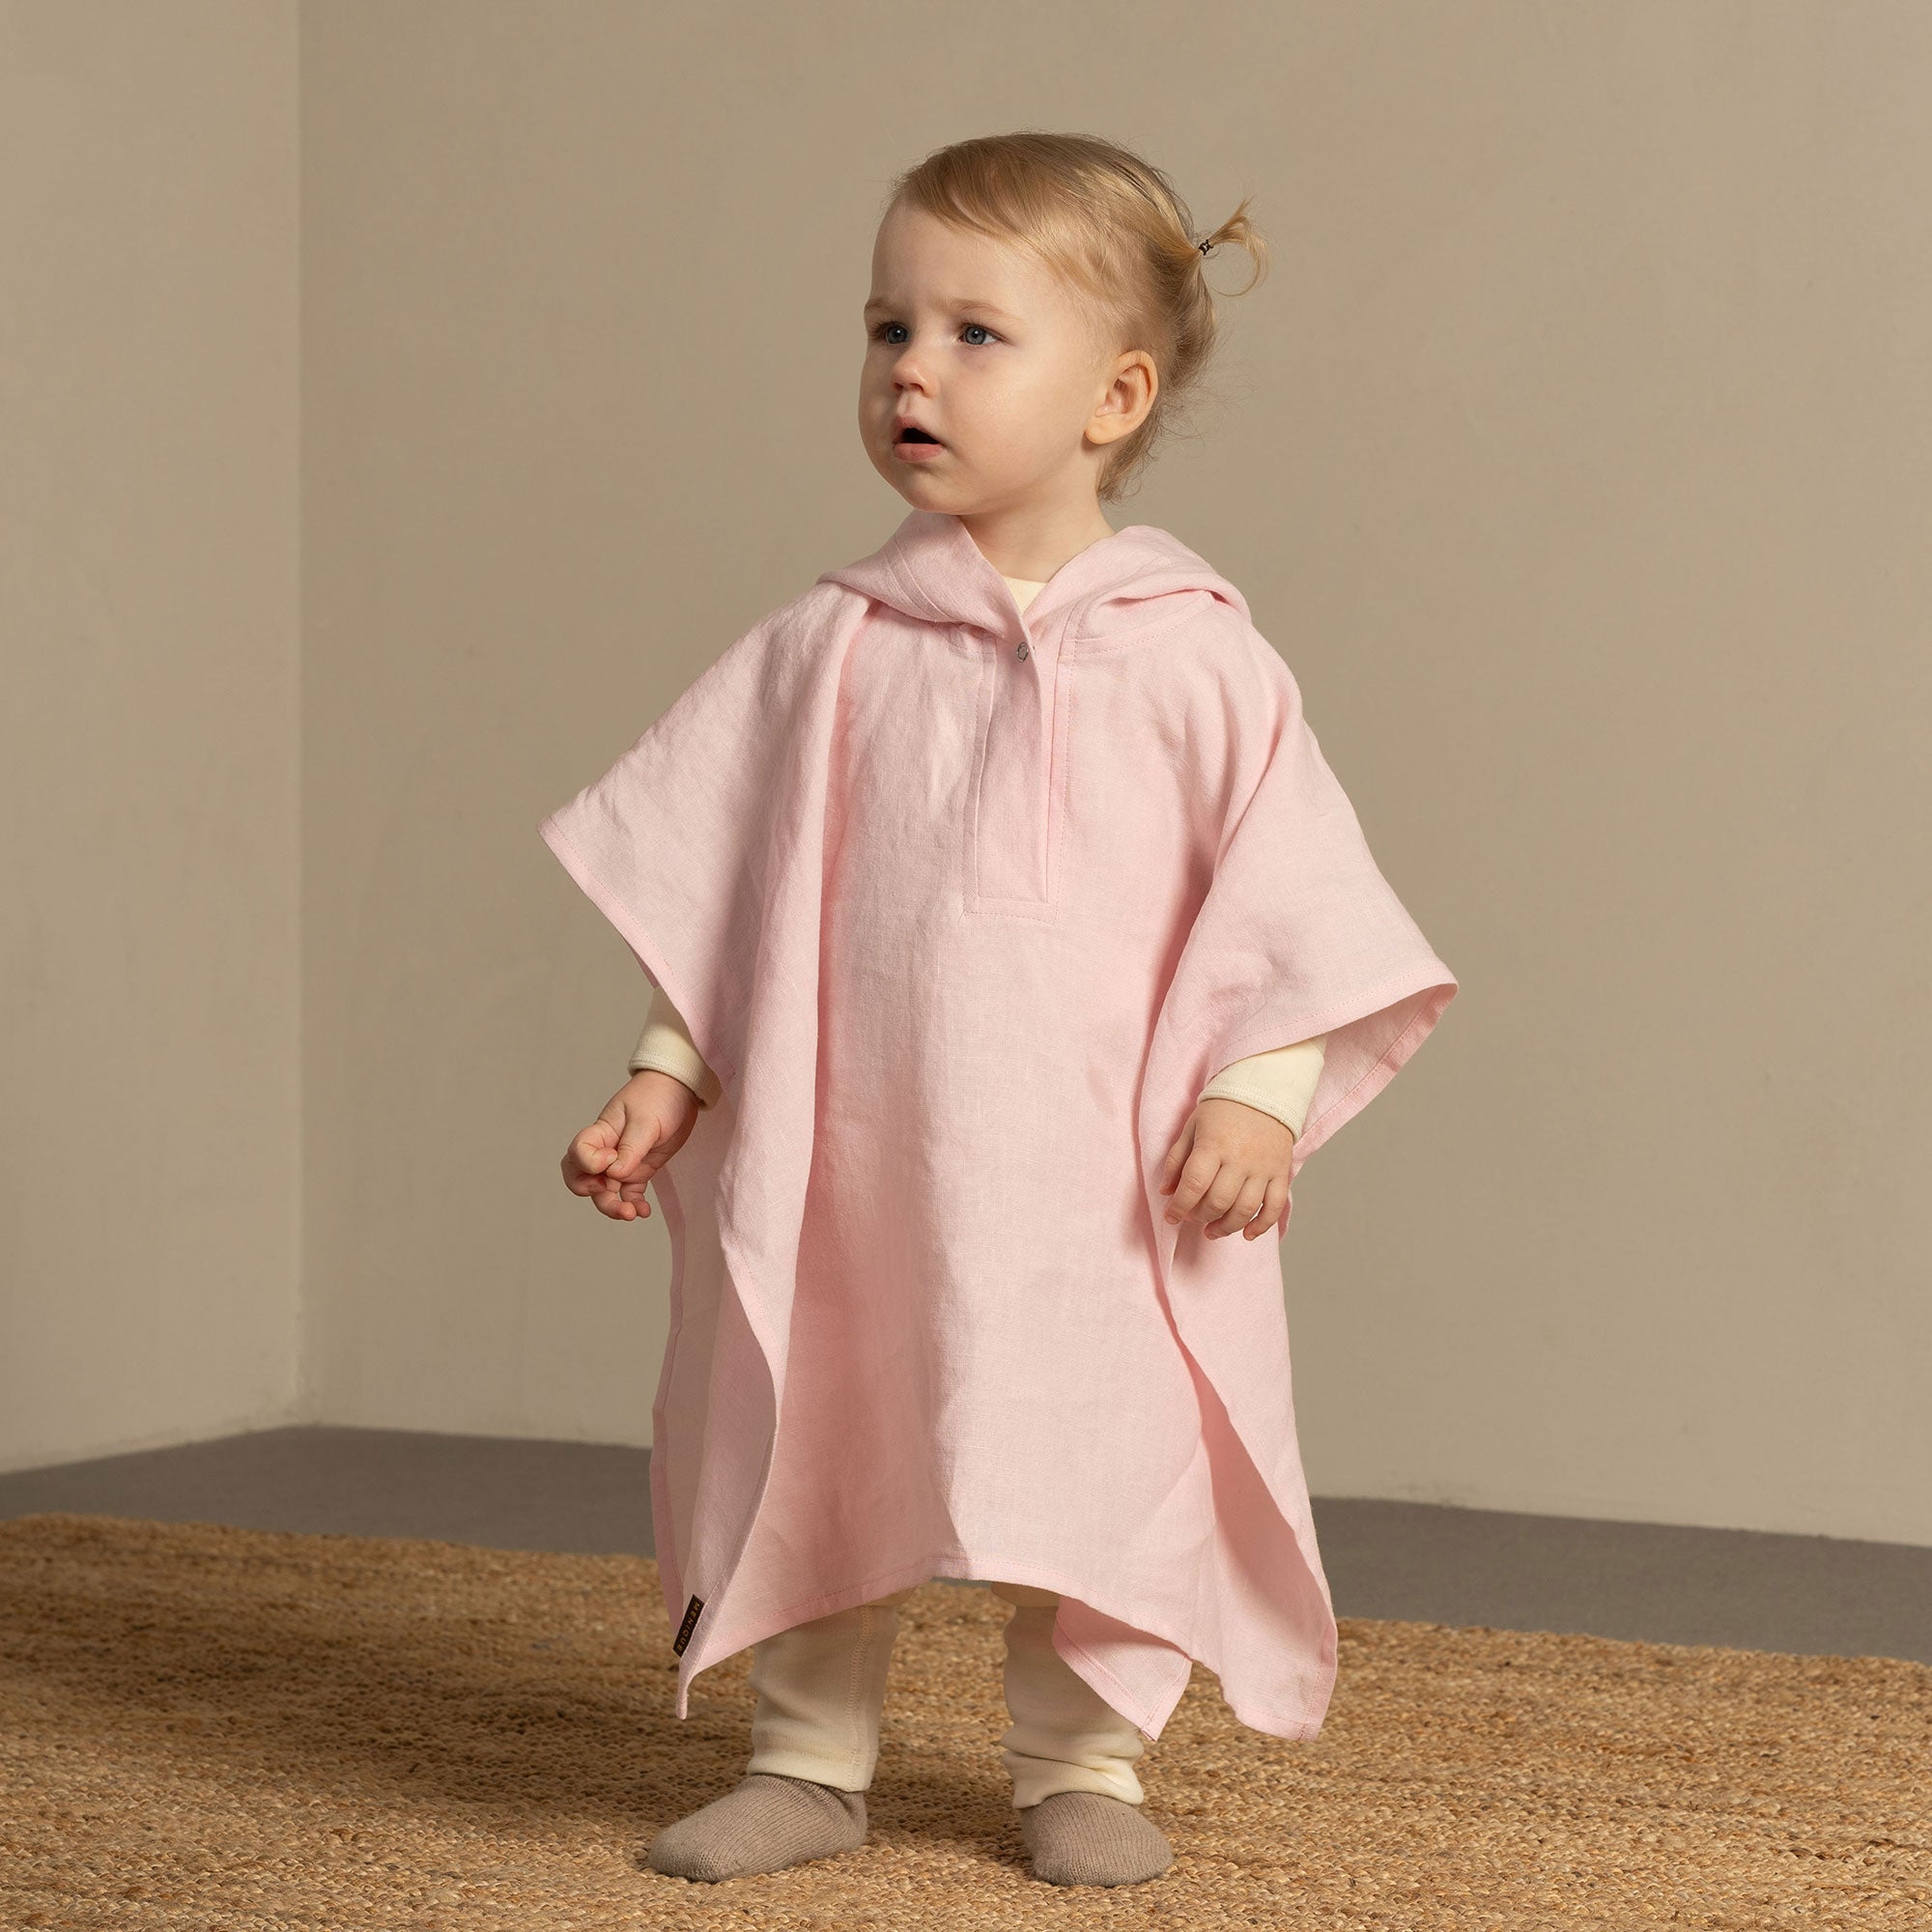 Linen baby poncho in dusty pink color